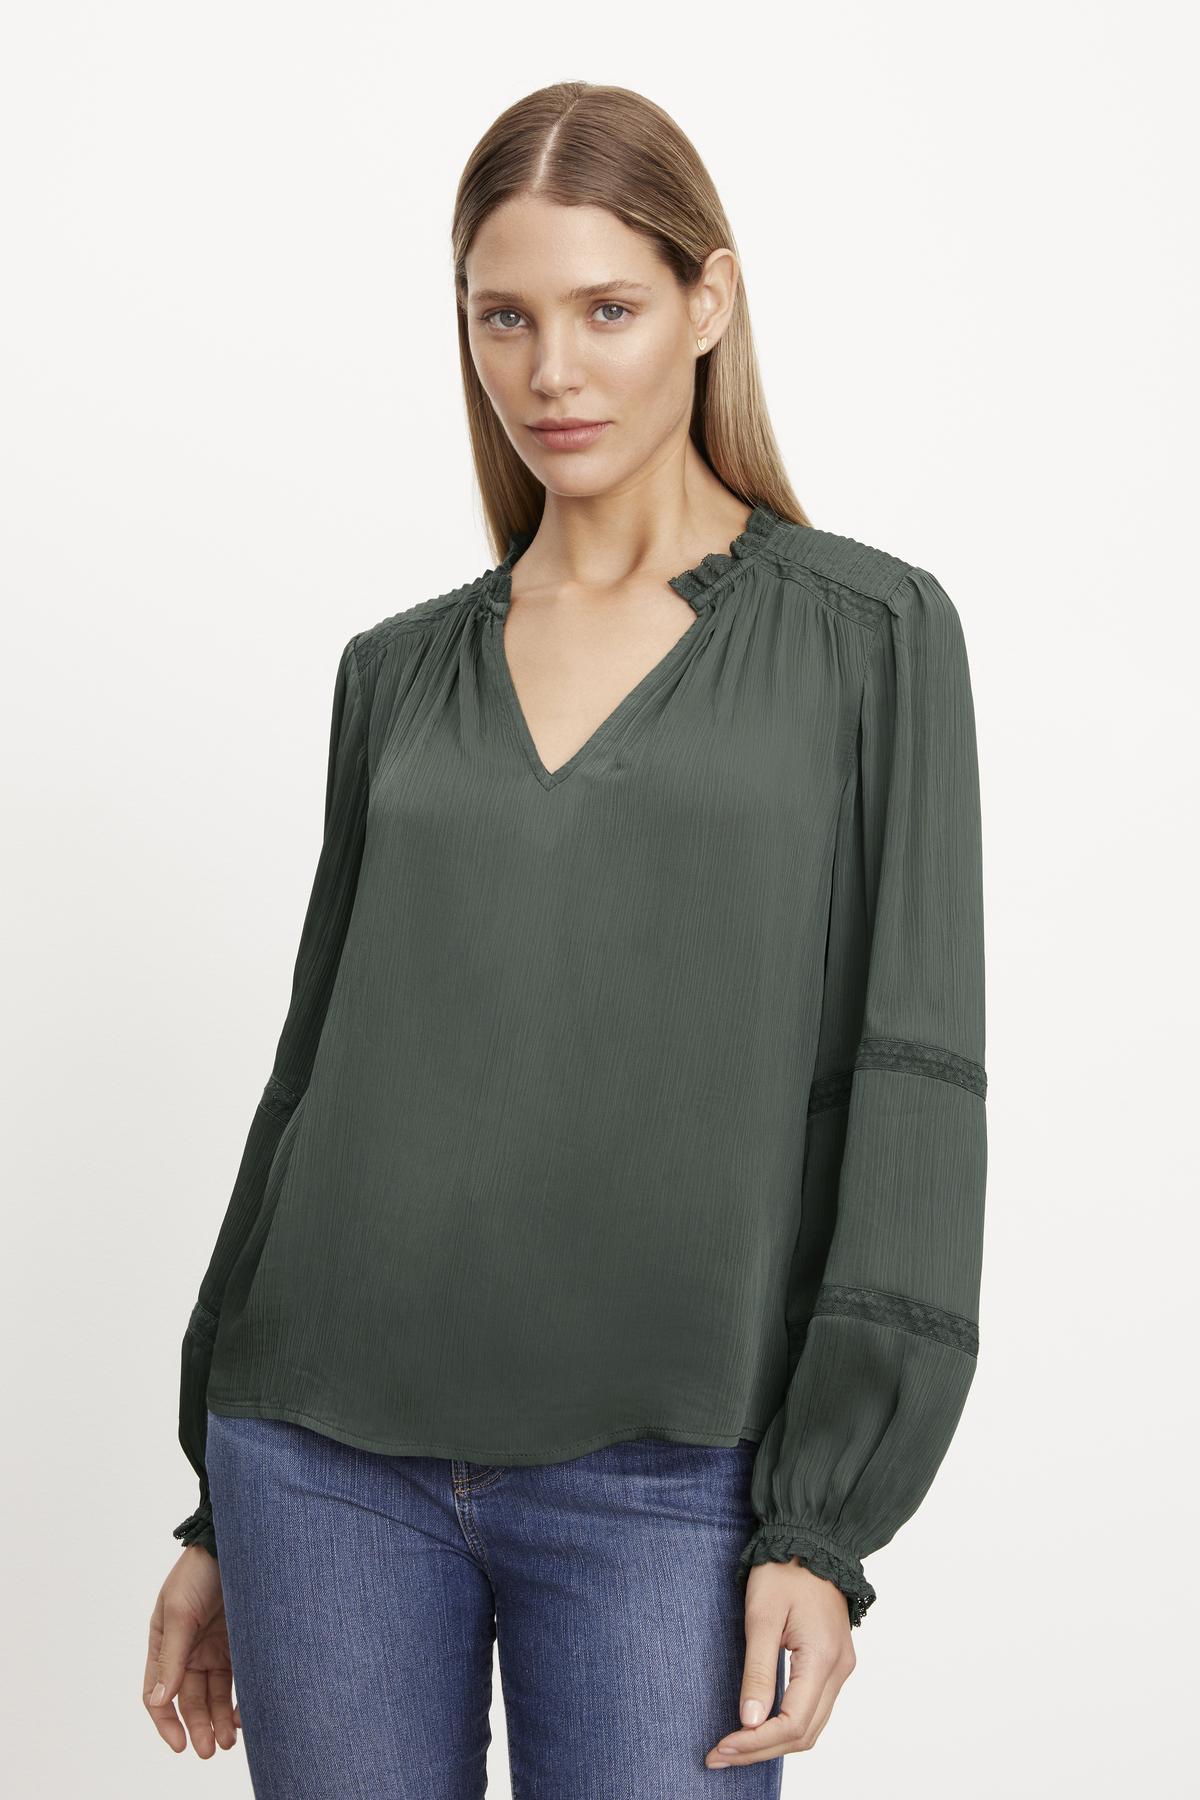 The model is wearing a green lace Velvet by Graham & Spencer blouse with long sleeves.-35630355316929